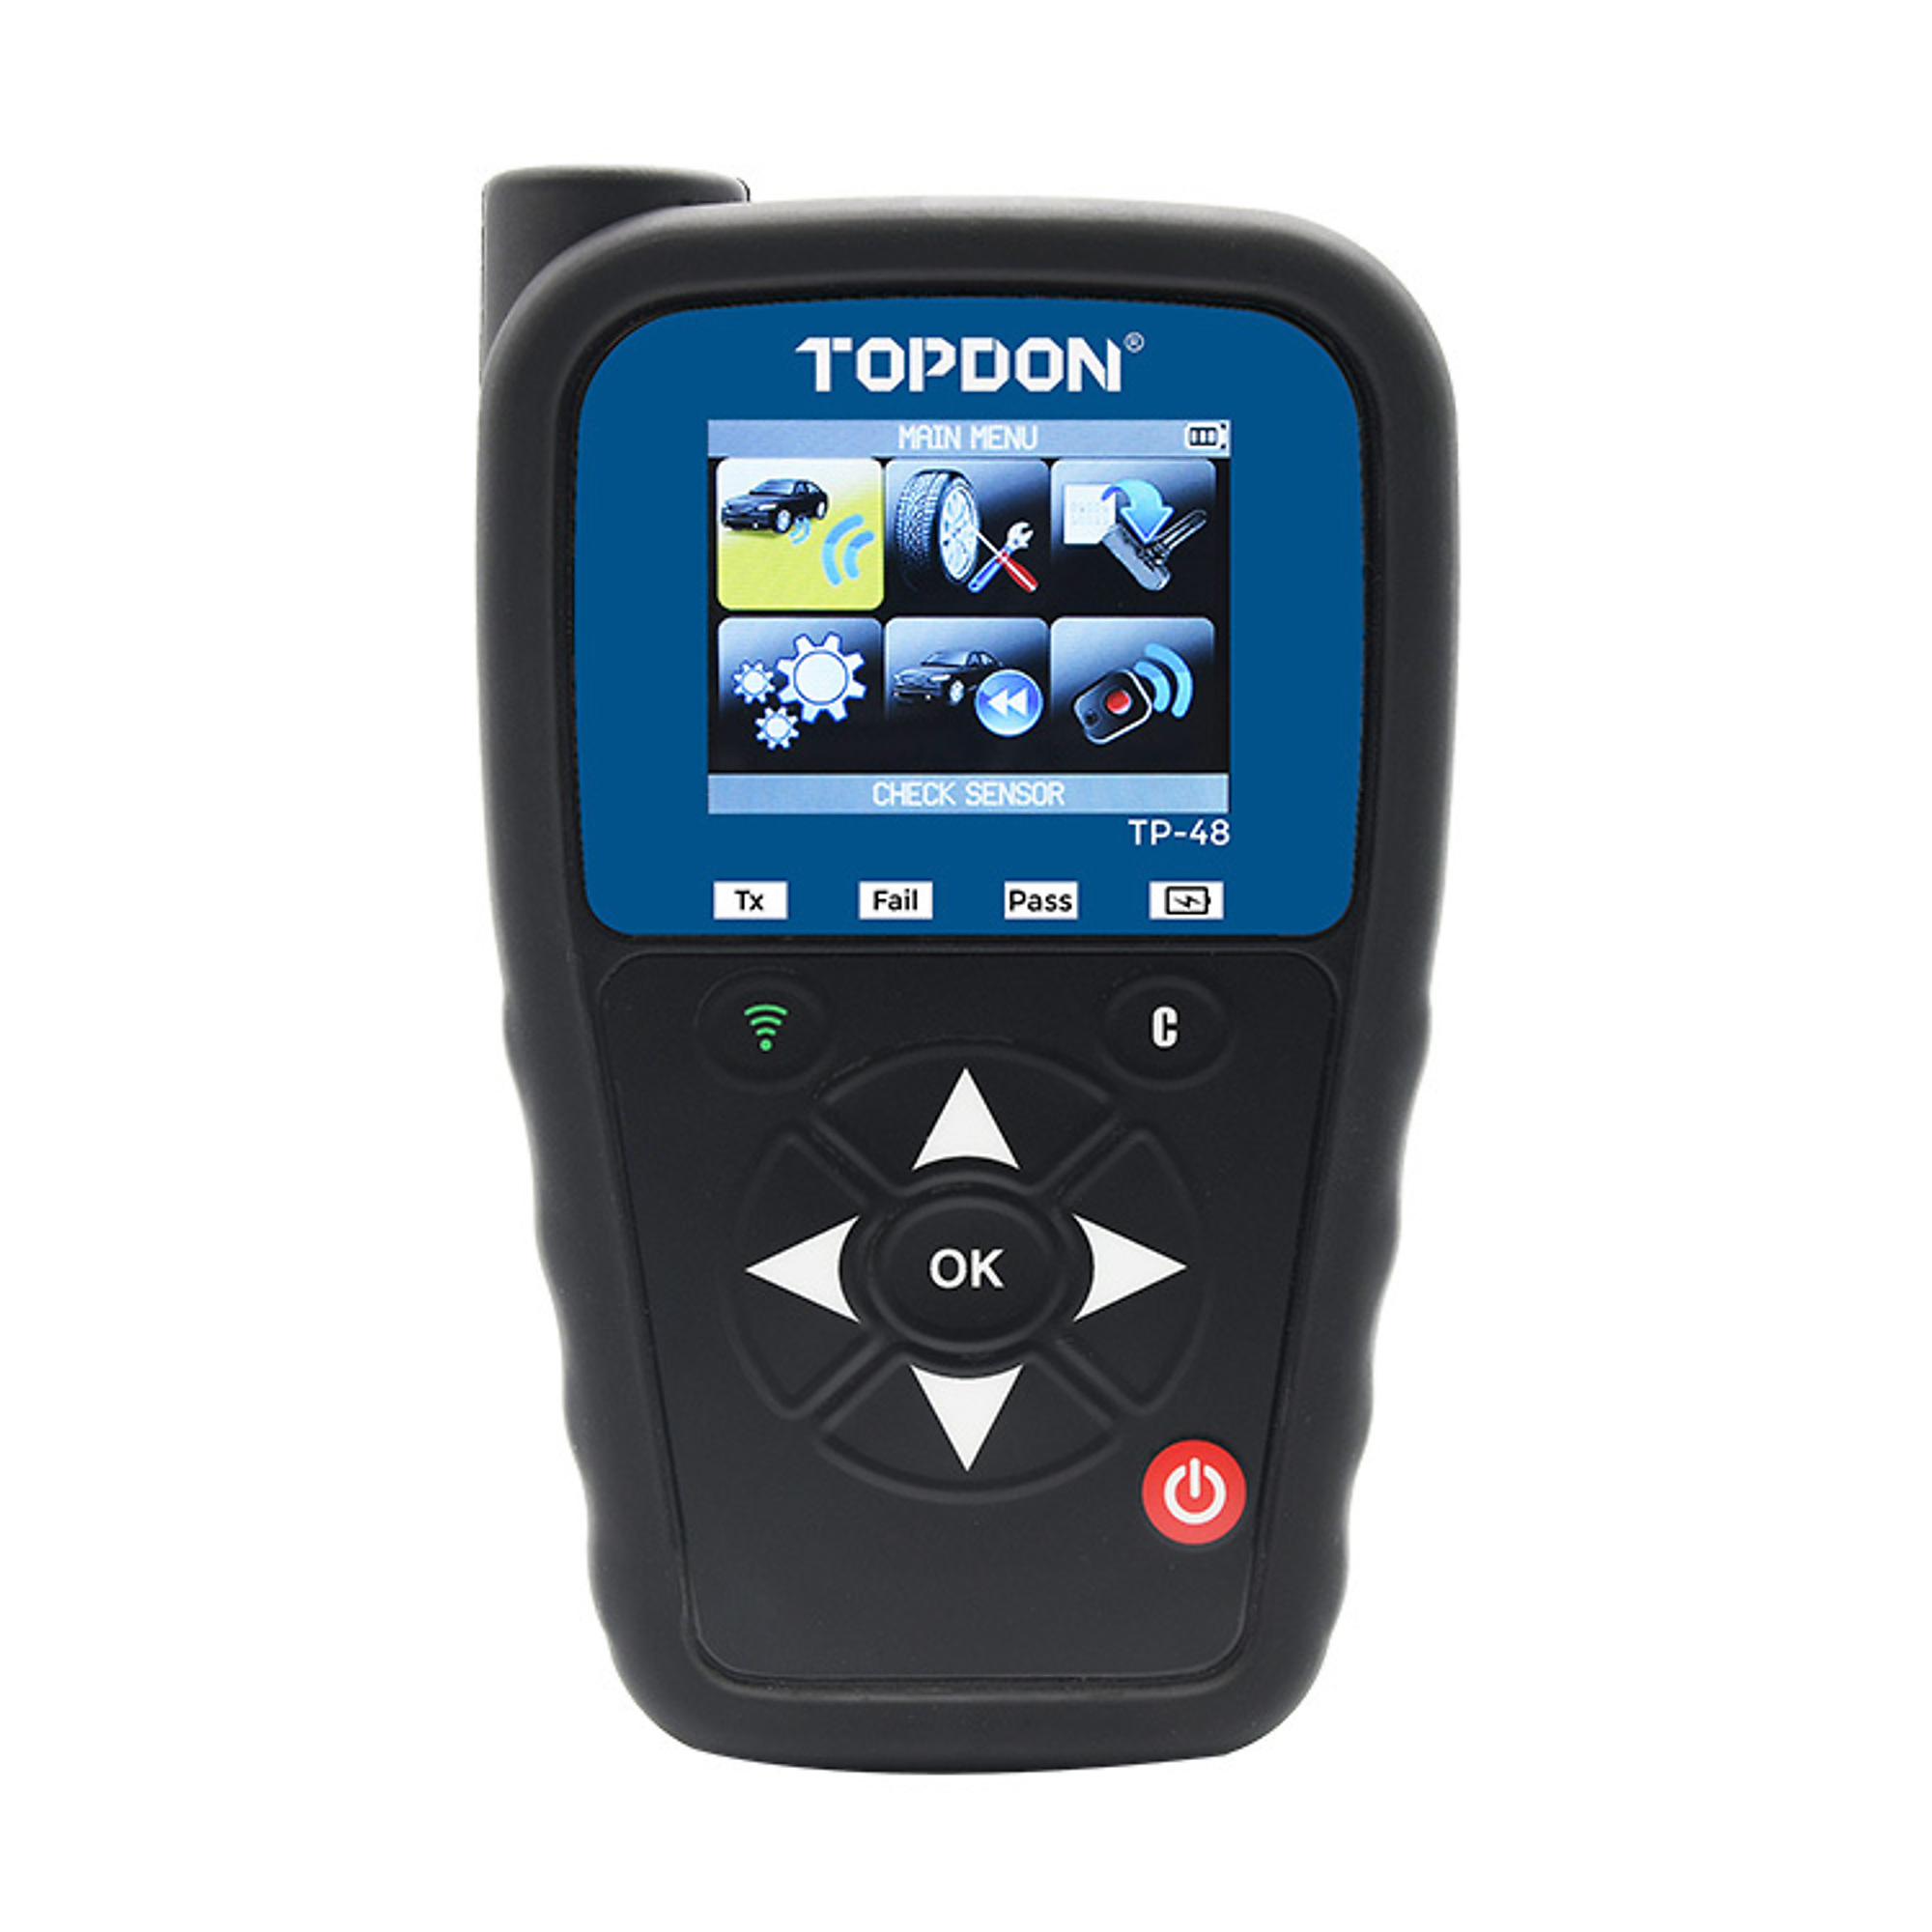 TOPDON, Robust OBDII capable TPMS tool, Model TP48